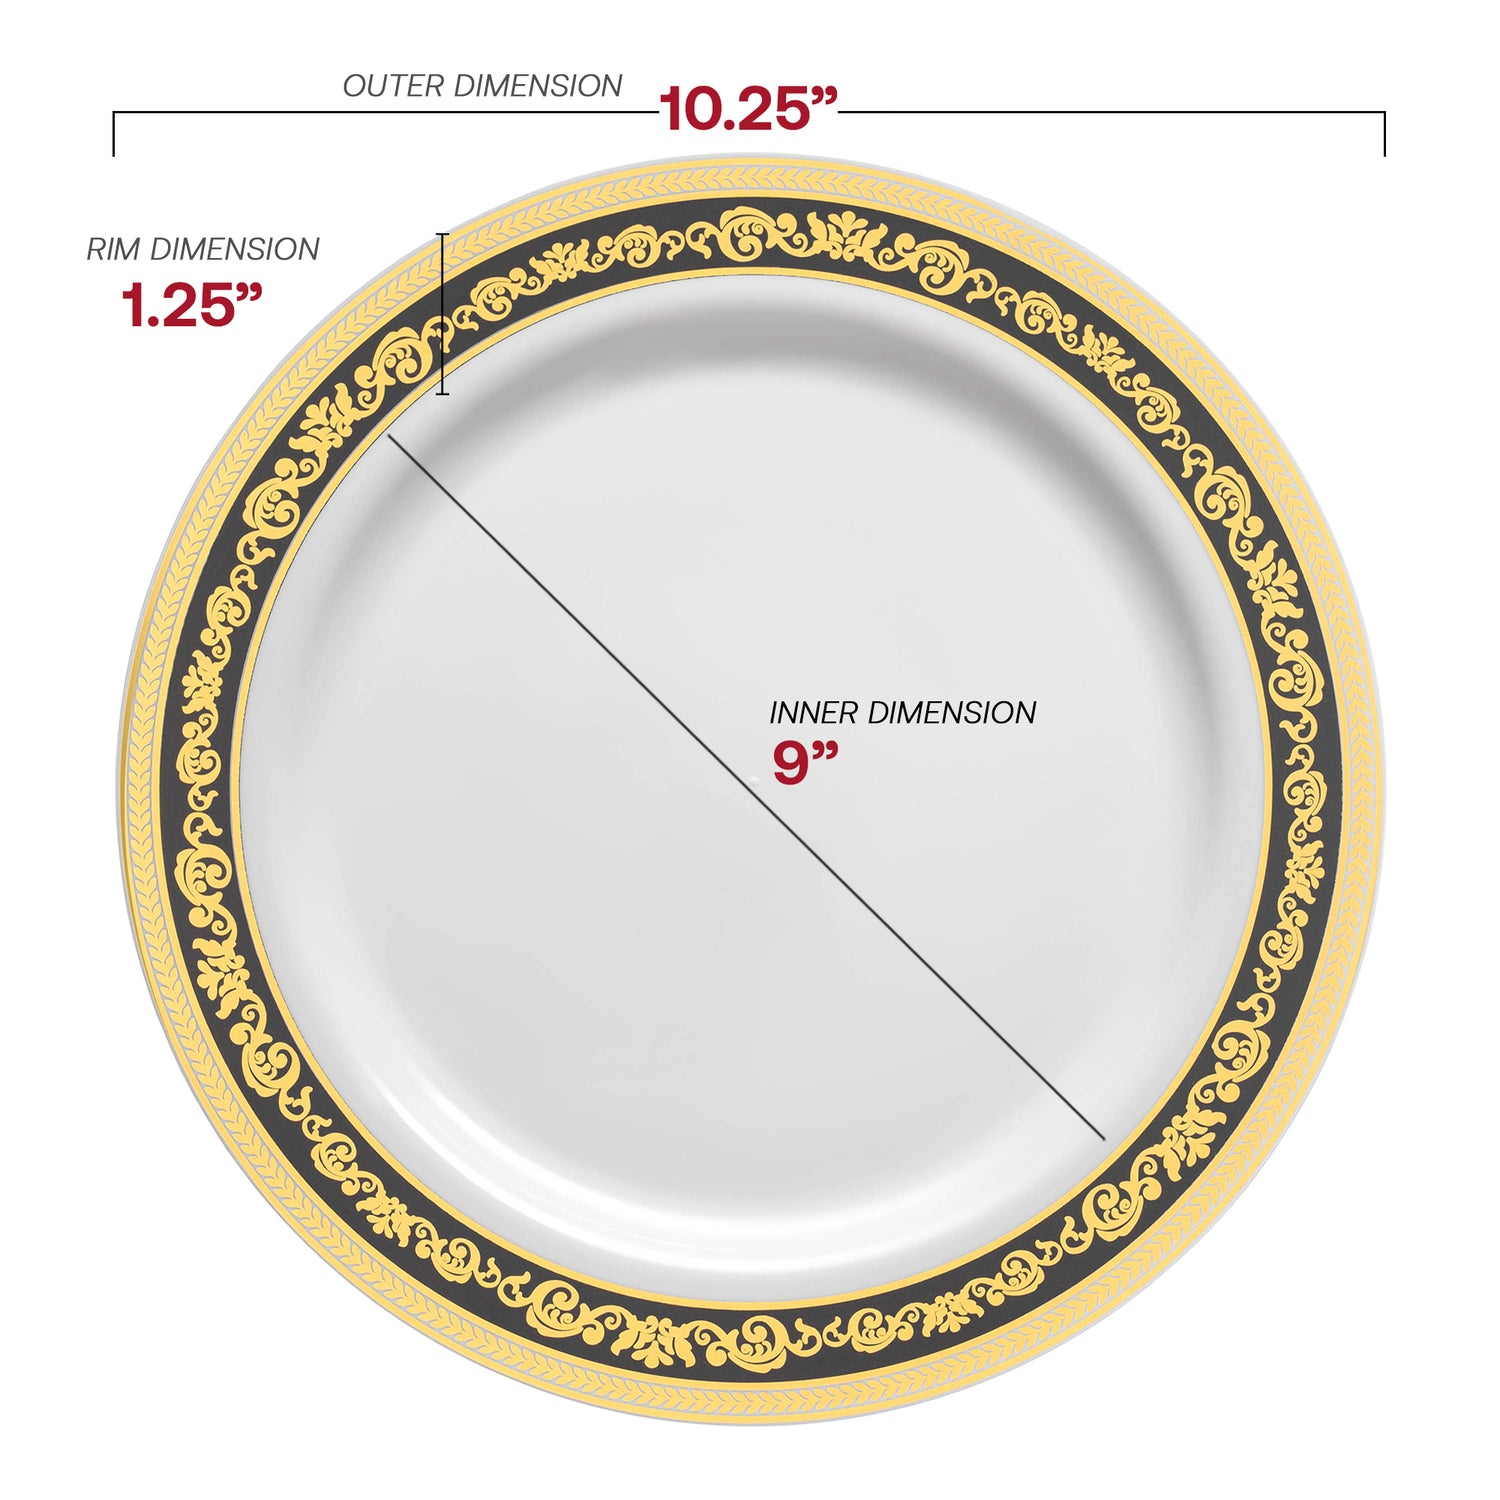 White with Black and Gold Royal Rim Plastic Dinner Plates (10.25") Dimension | The Kaya Collection